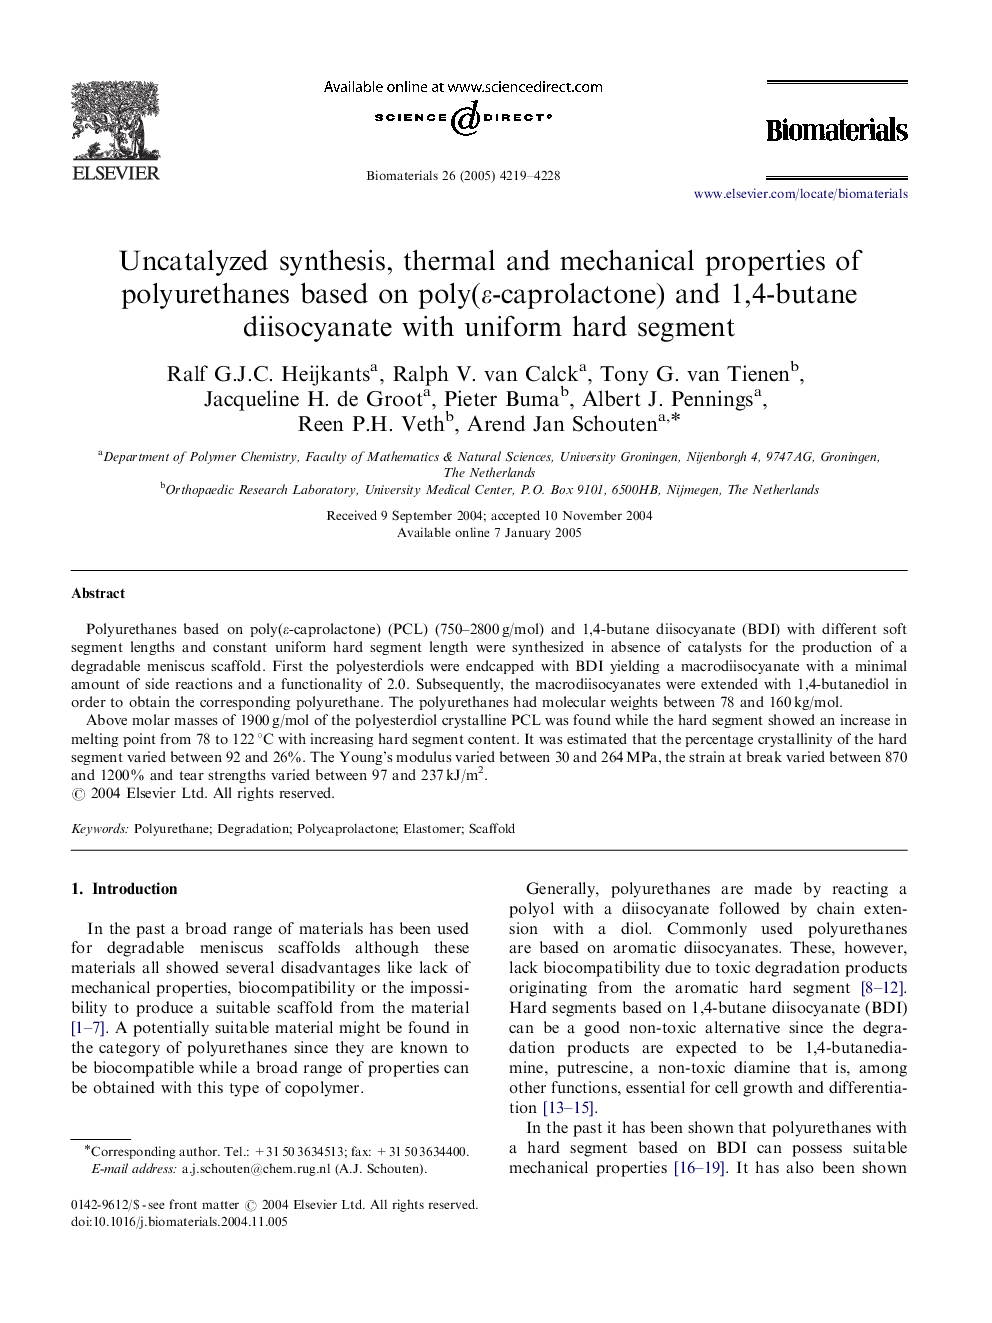 Uncatalyzed synthesis, thermal and mechanical properties of polyurethanes based on poly(εε-caprolactone) and 1,4-butane diisocyanate with uniform hard segment